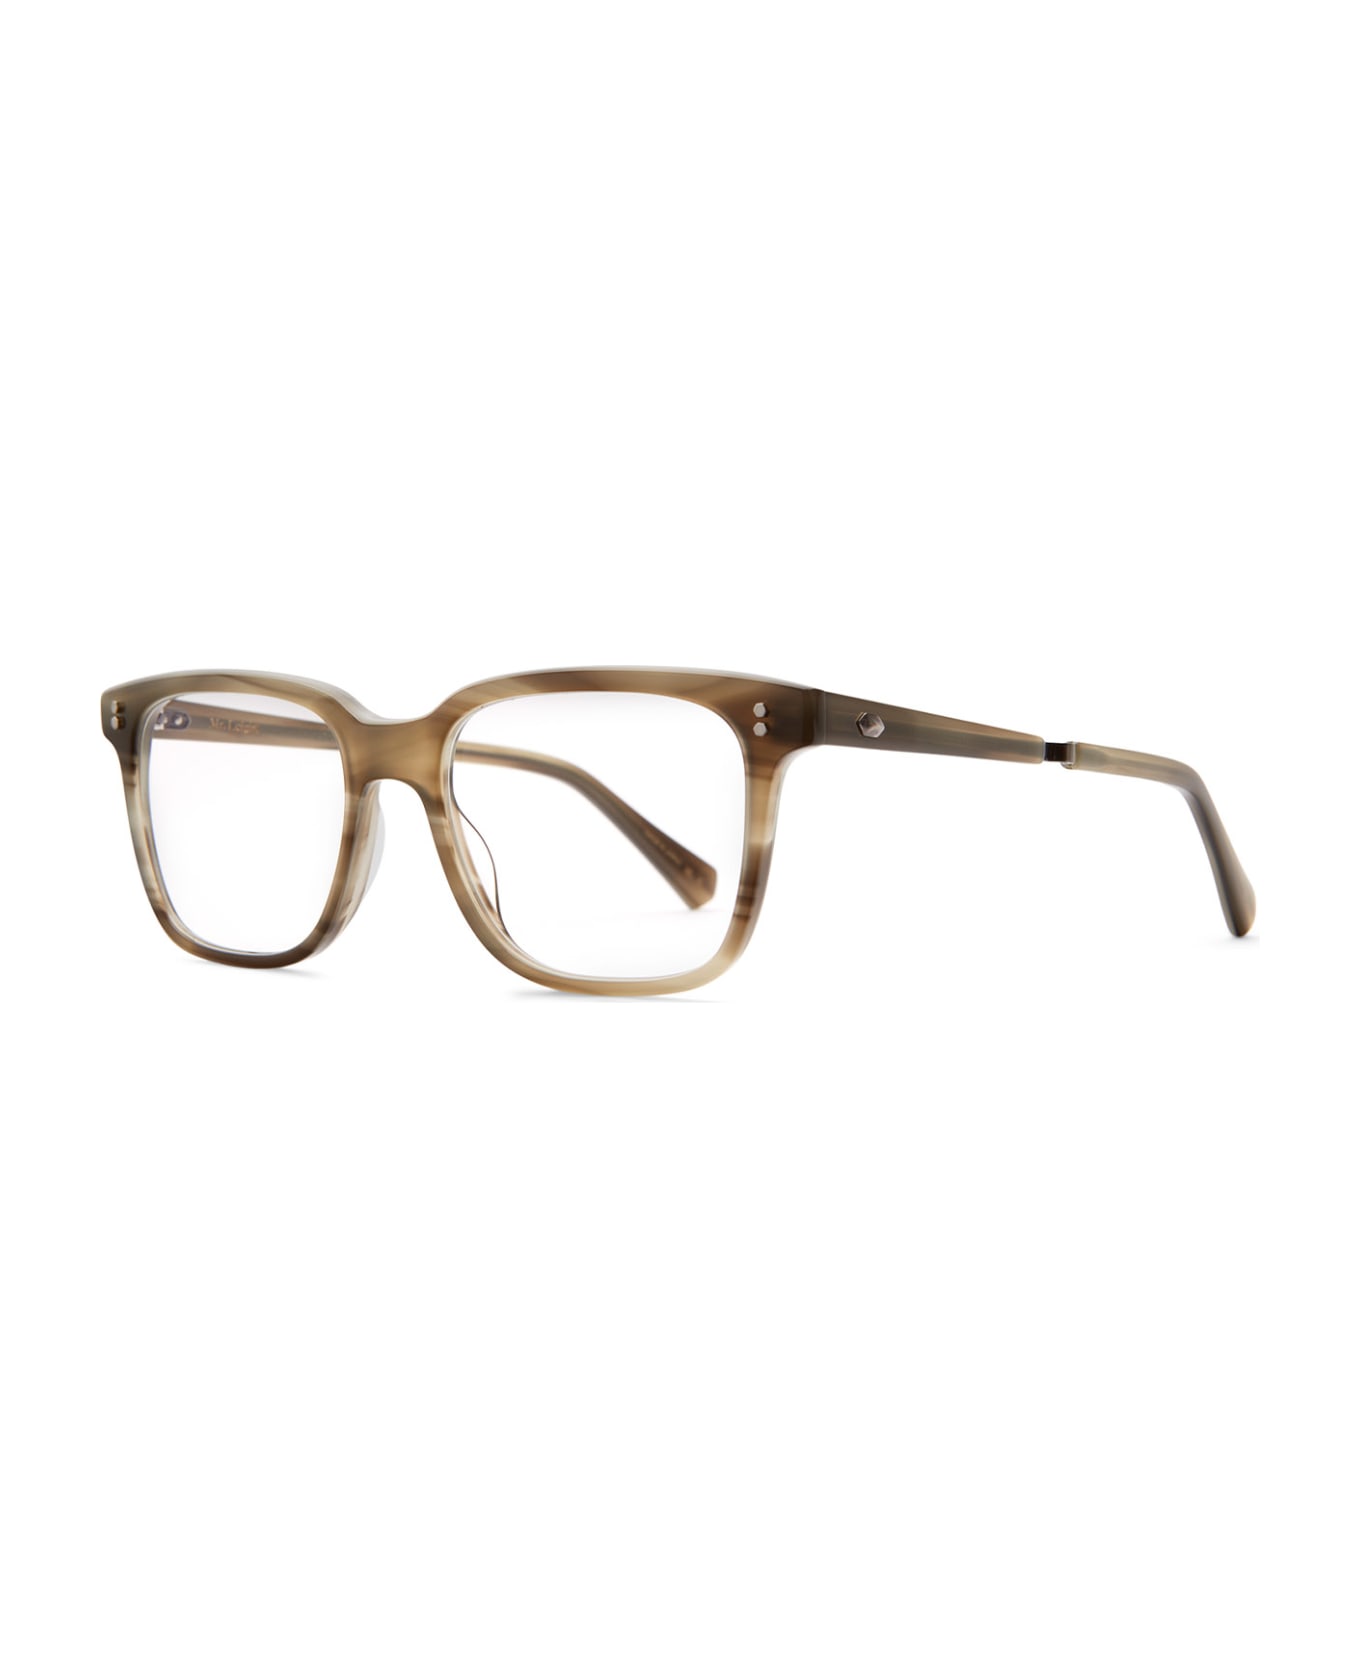 Mr. Leight Lautner C Sycamore-pewter Glasses - Sycamore-Pewter アイウェア